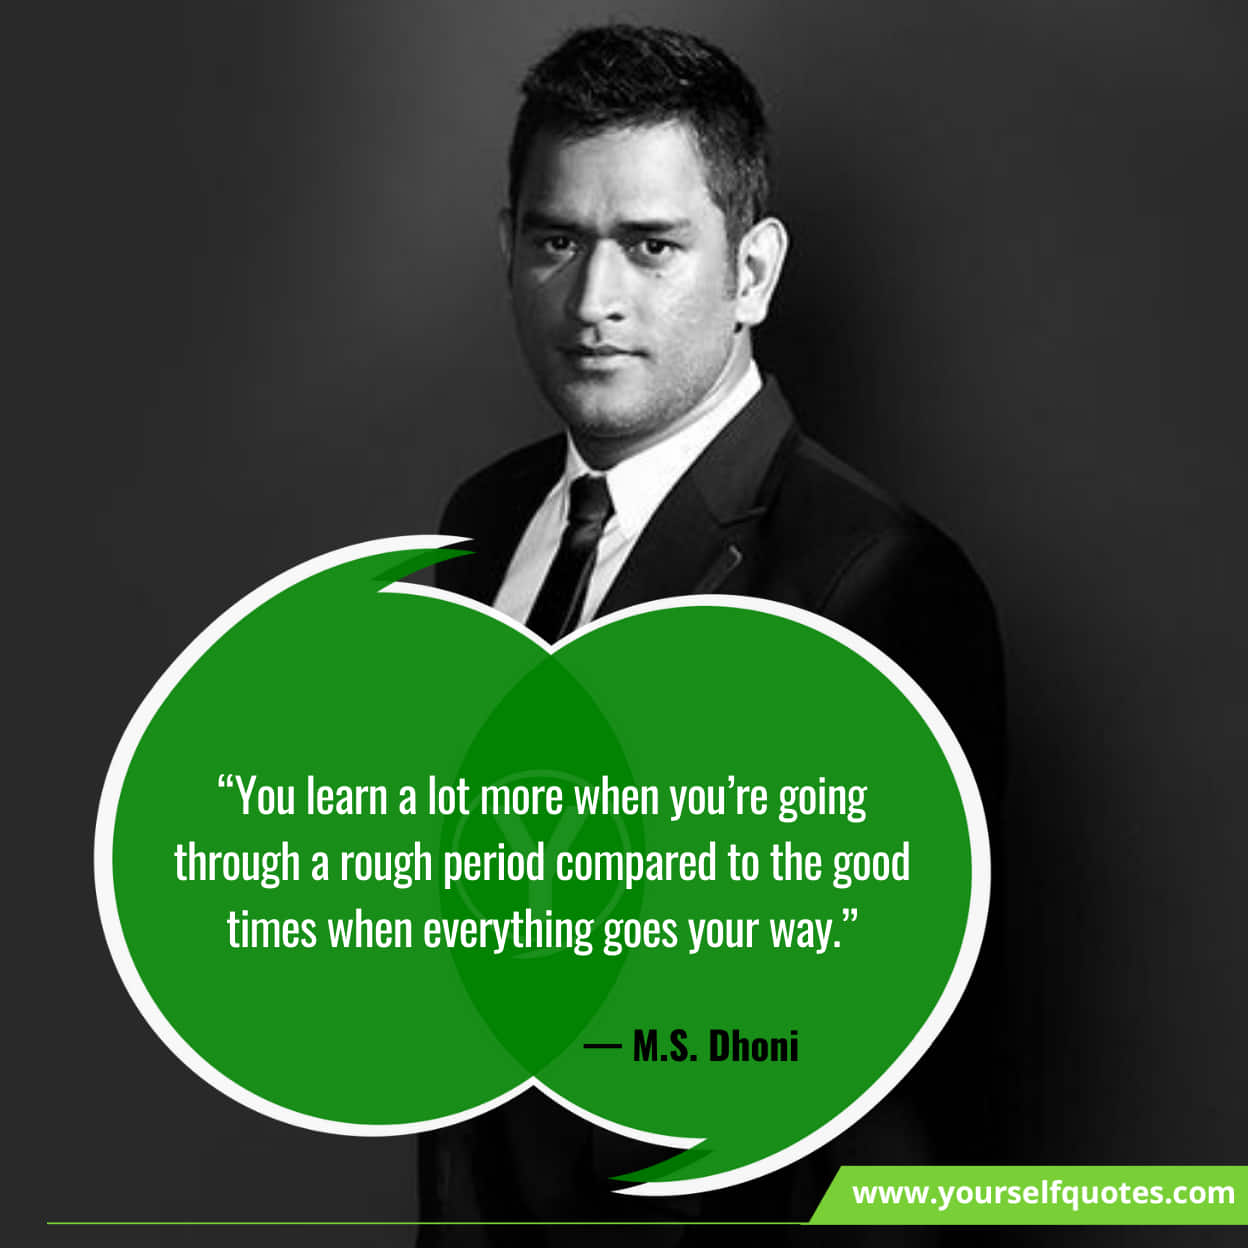 MS Dhoni Quotes On Success